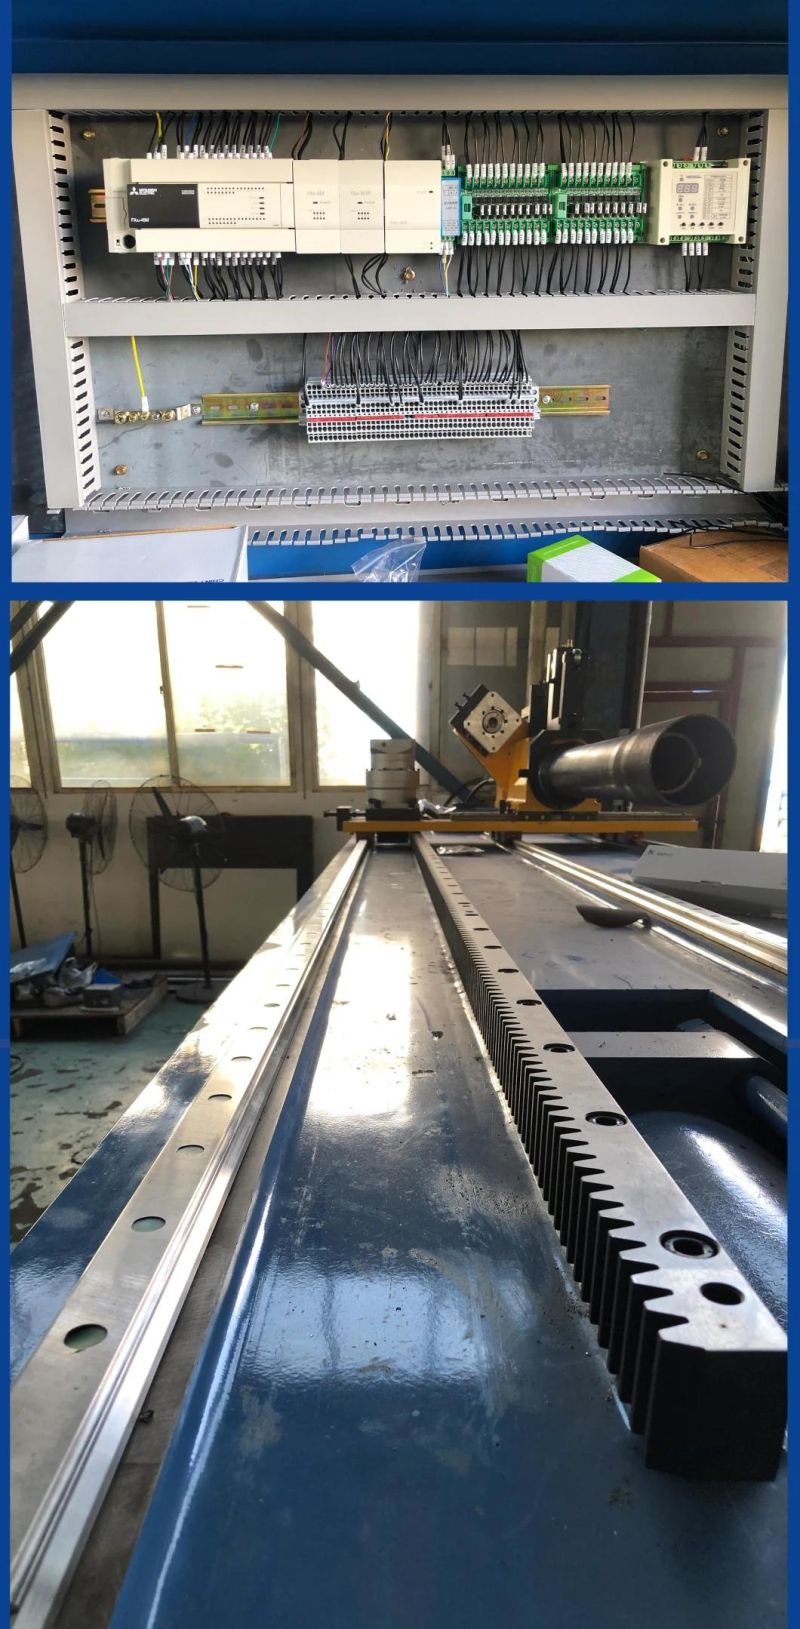 Rt-130CNC Automatic CNC Single Head Hydraulic Pipe Bender Machine for Metal Tube and Round Bar and Square Stick